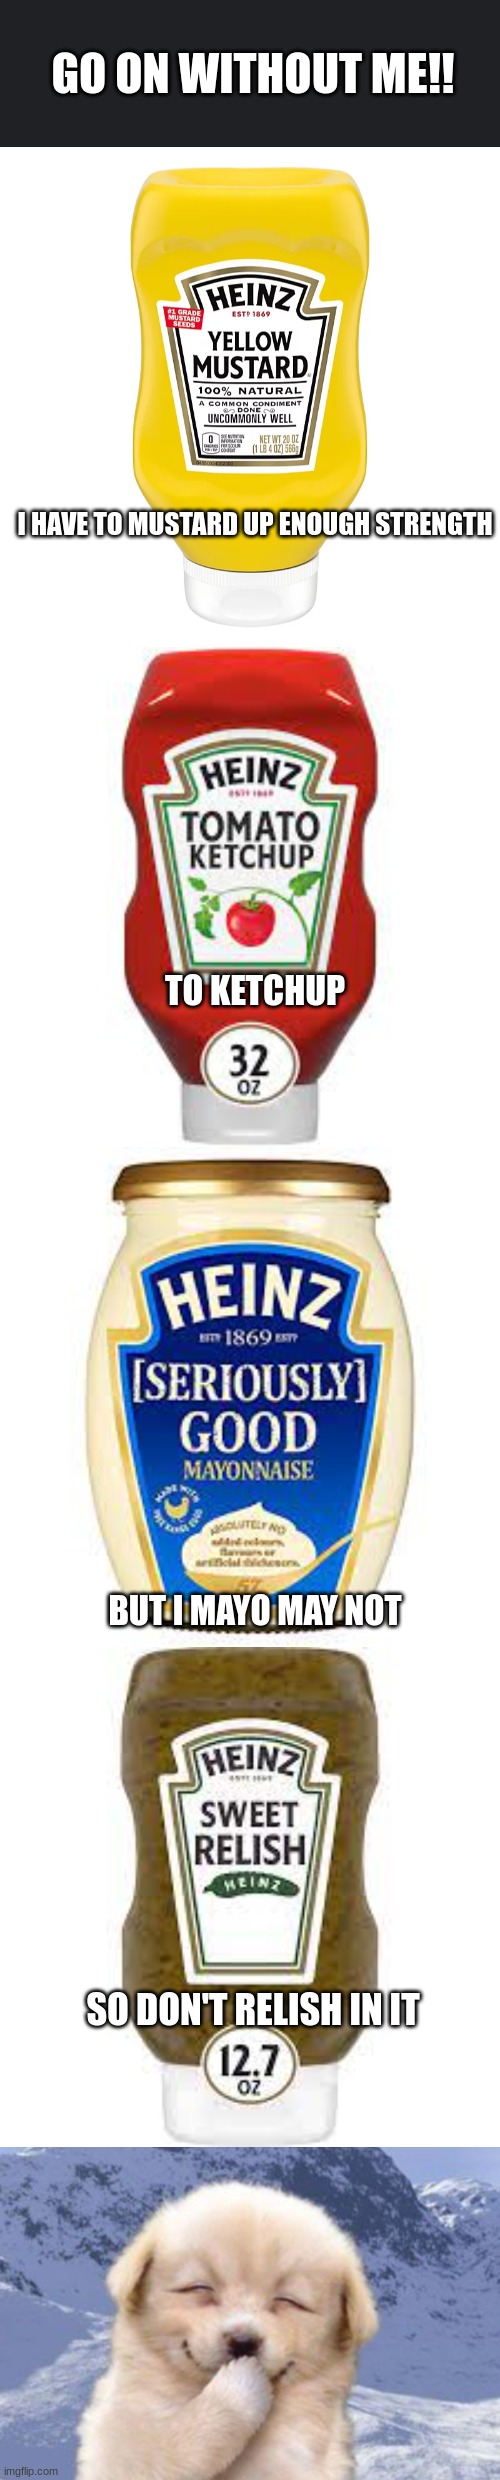  GO ON WITHOUT ME!! I HAVE TO MUSTARD UP ENOUGH STRENGTH; TO KETCHUP; BUT I MAYO MAY NOT; SO DON'T RELISH IN IT | image tagged in memes,laughing dog,ketchup,mustard,mayonnaise,relish | made w/ Imgflip meme maker